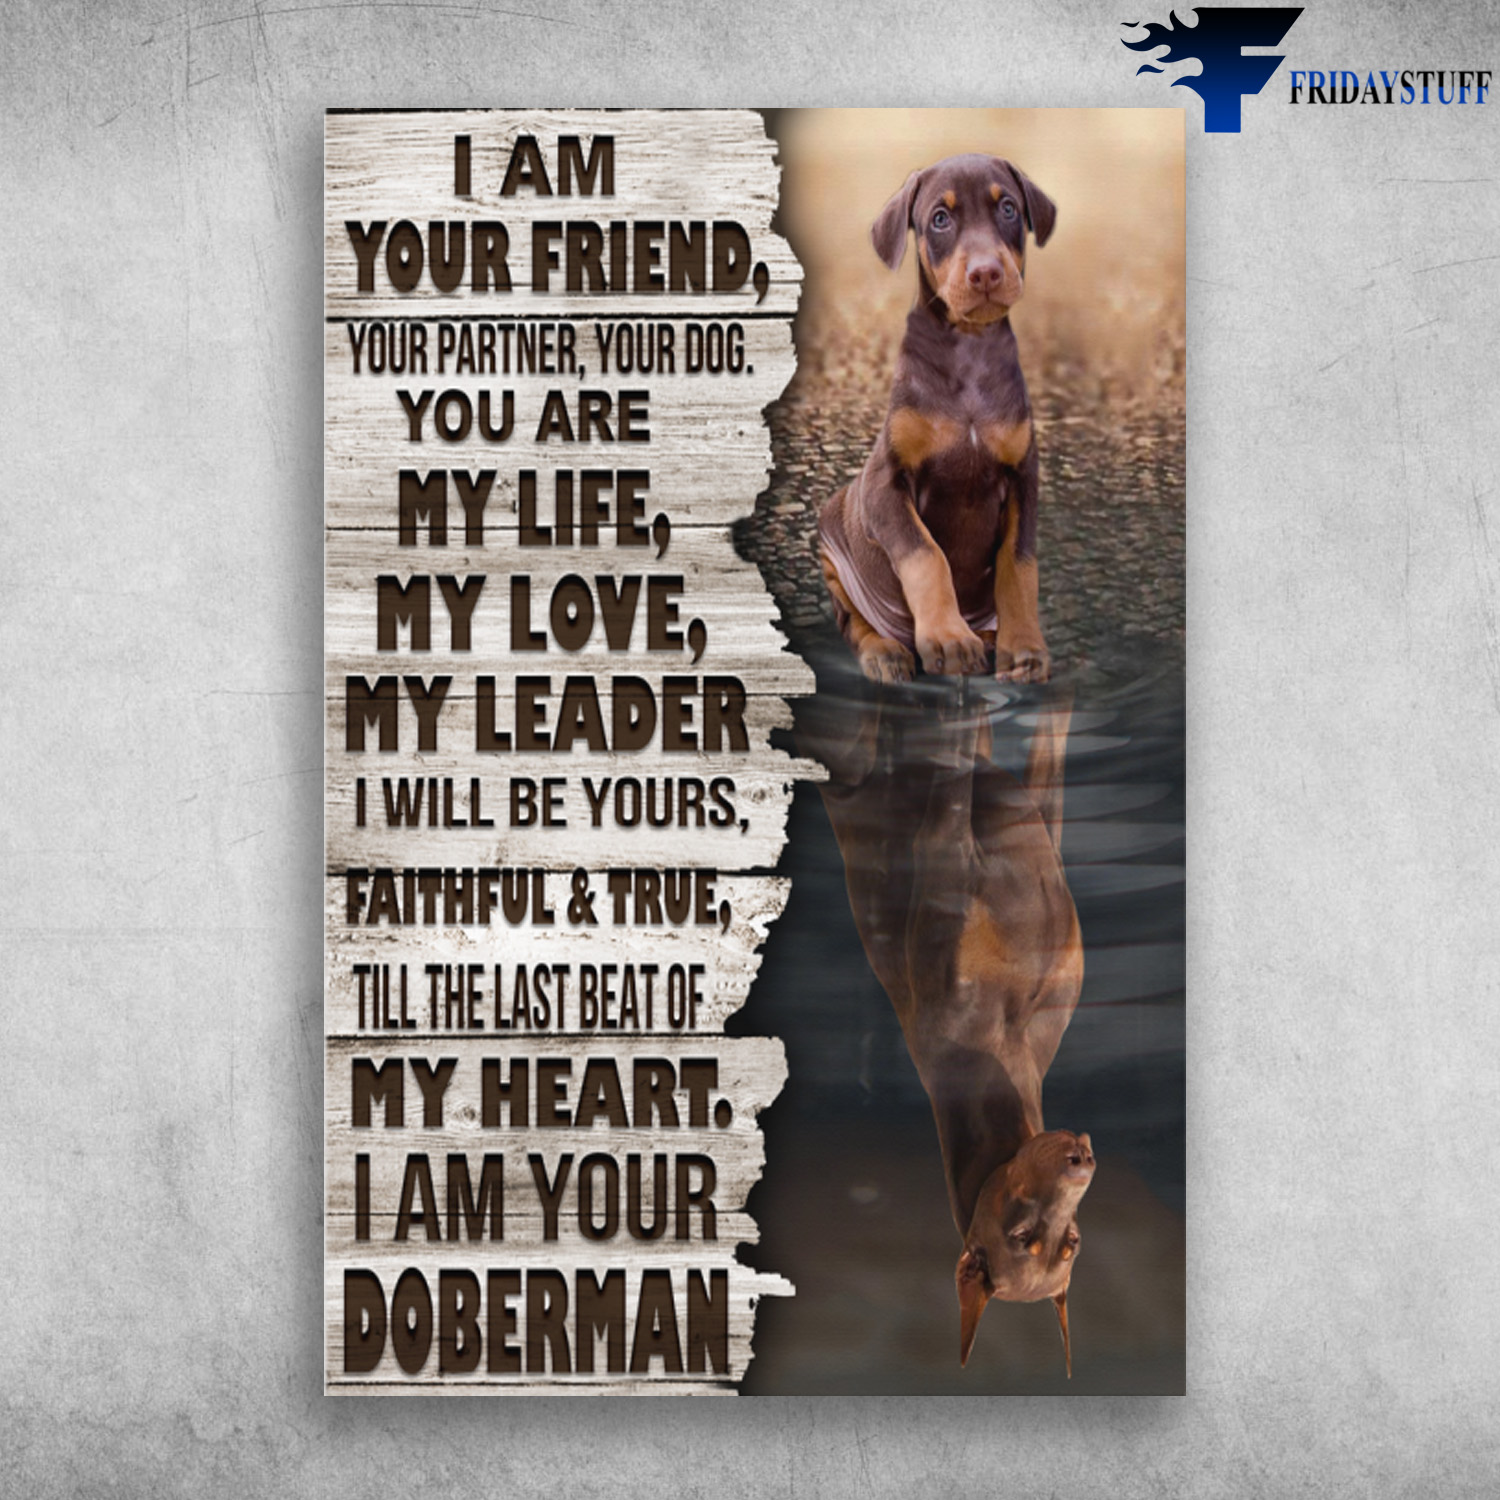 Doberman Dog - I Am Your Friend, Your Partner, Your Dog, You Are My Life, My Love, My Leader, I Will Be Yours, Faithful And True, Till The Last Beat Of My Heart, I Am Your Doberman